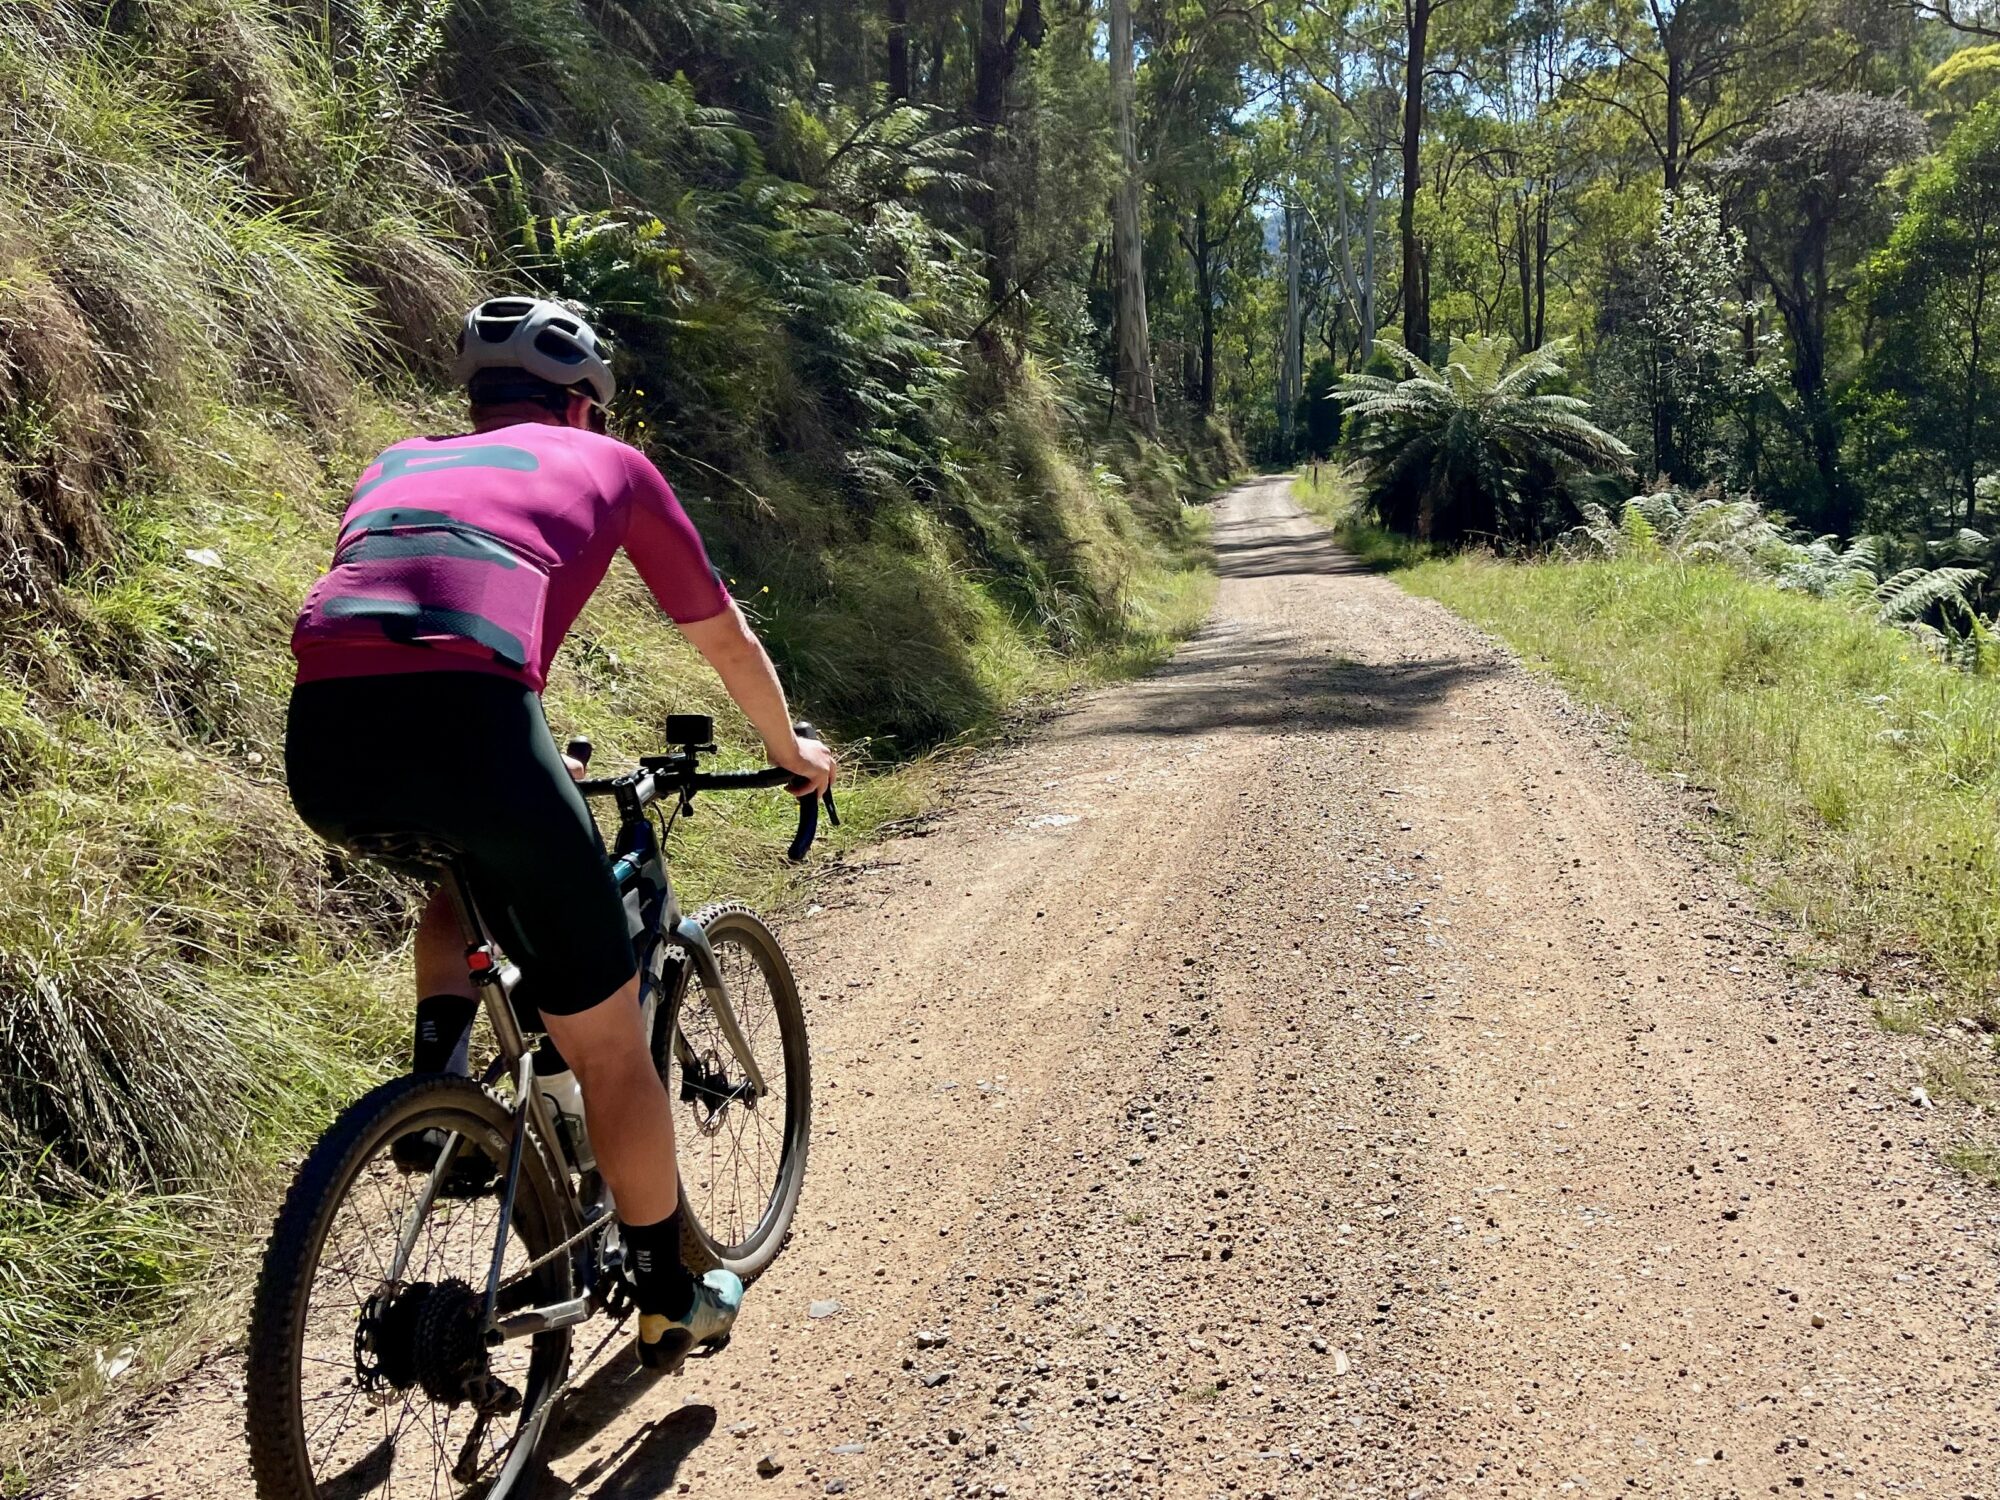 Cyclist riding up gravel road in native forest